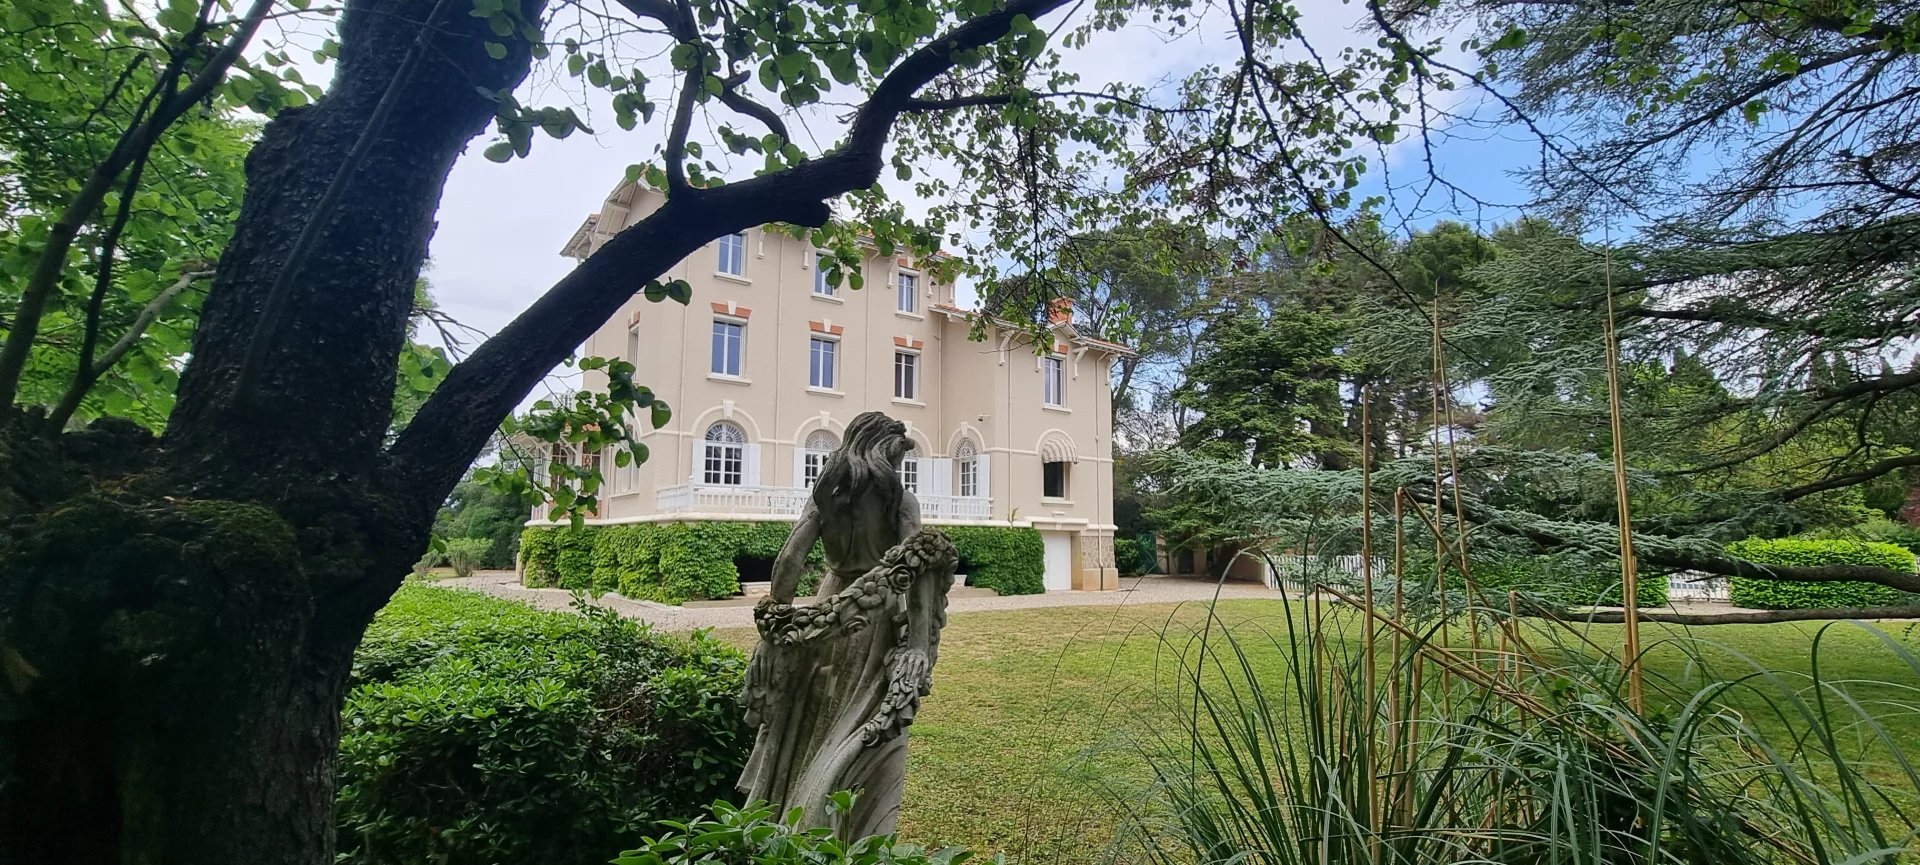 Chateau - 11 bedrooms, swimming pool, gardens and paddock